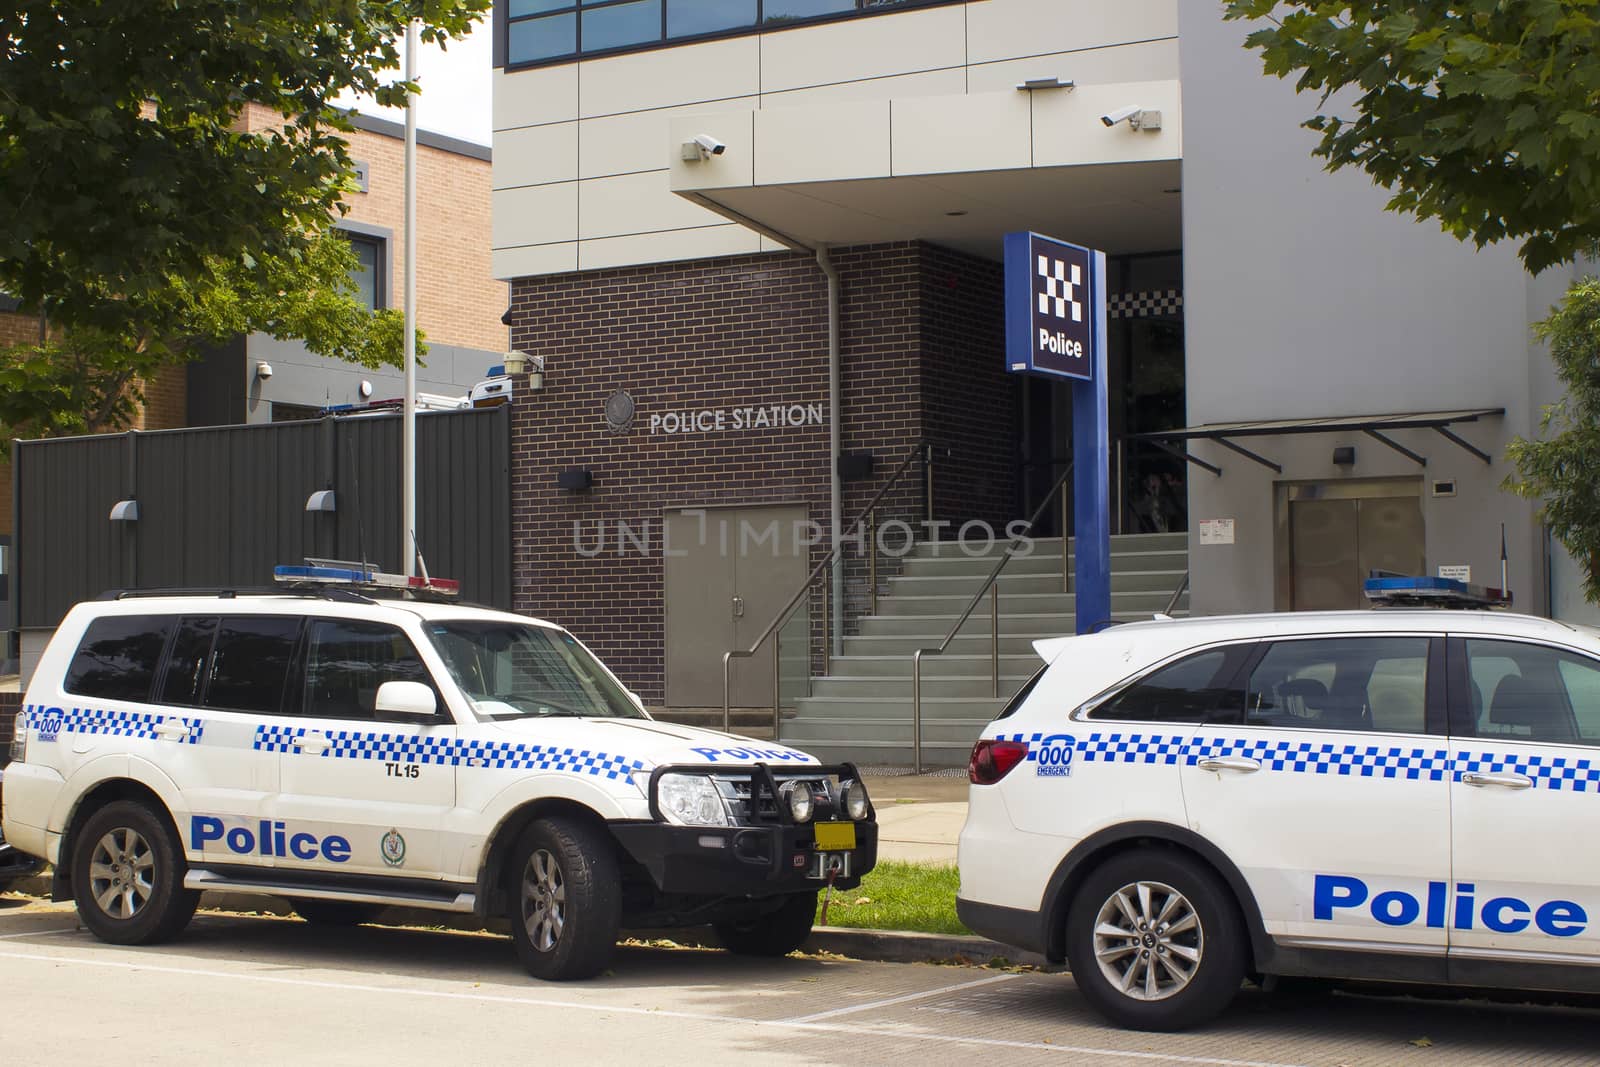 Police Vehicles Outside a Police Station by definitearts